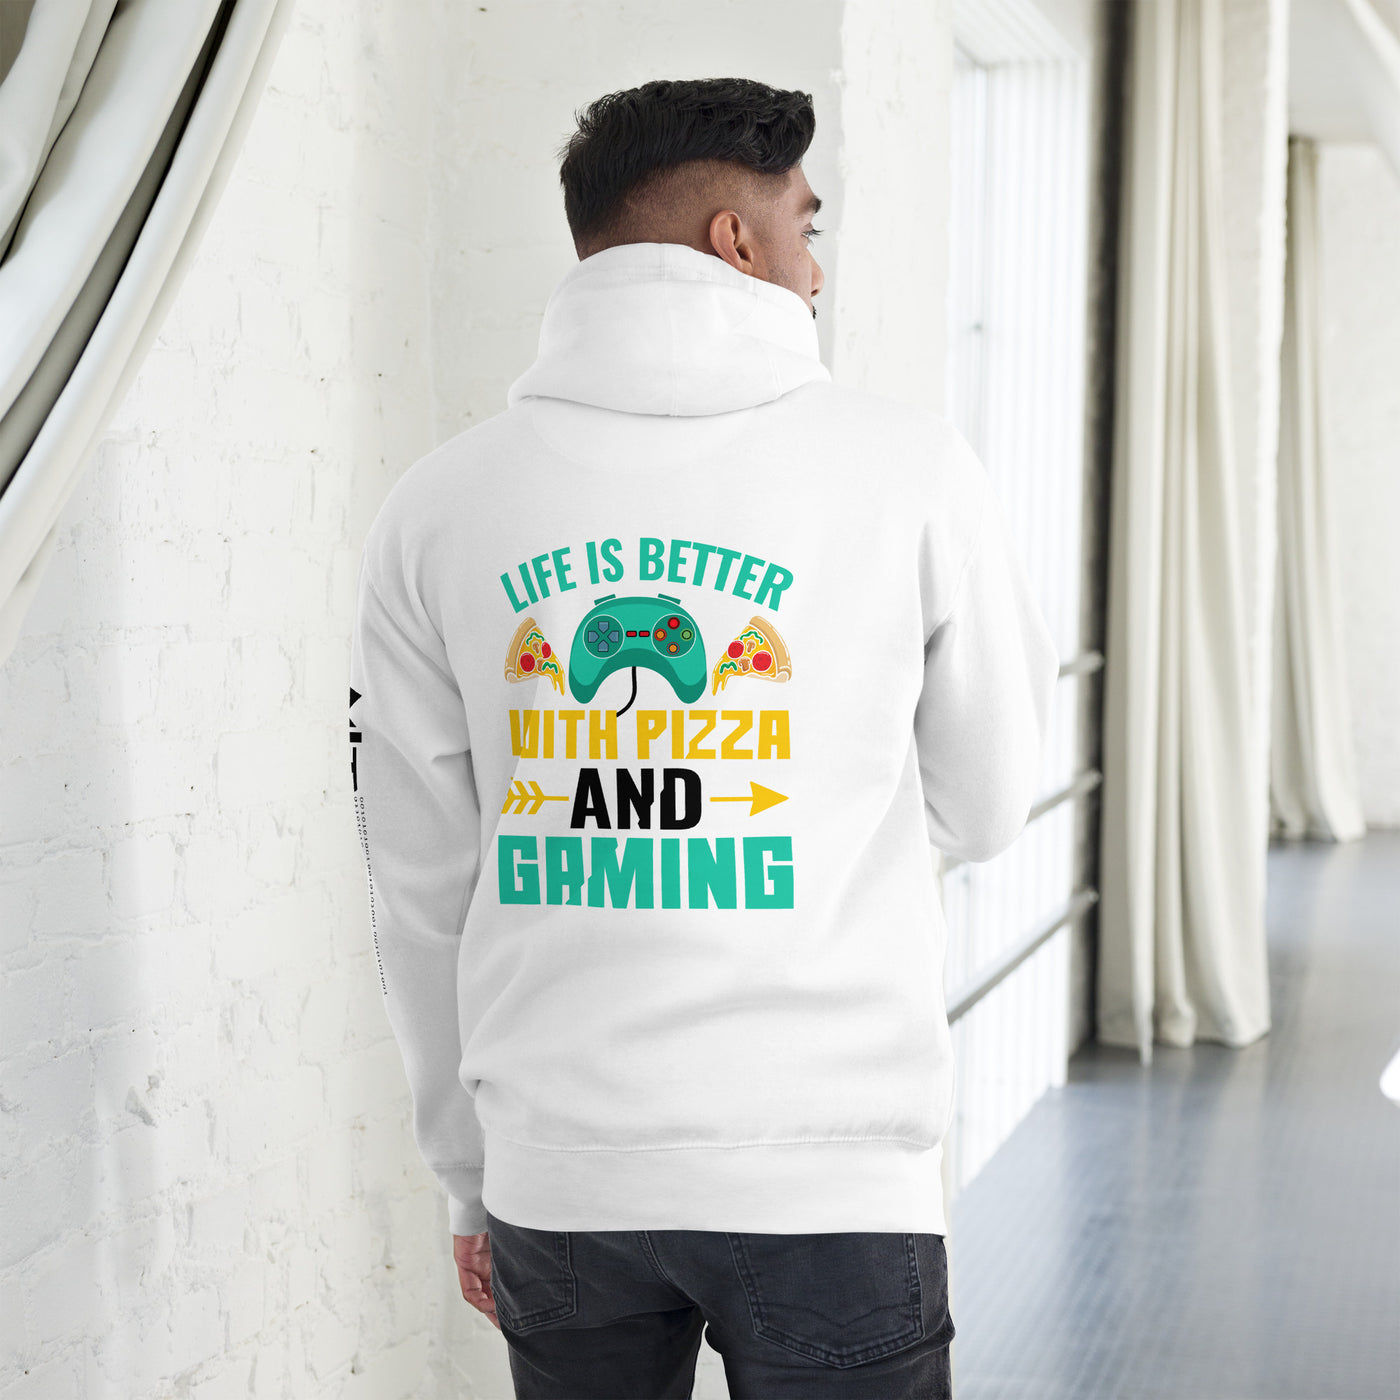 Life is Better With Pizza and Gaming Rima 14 in Dark Text - Unisex Hoodie ( Back Print )